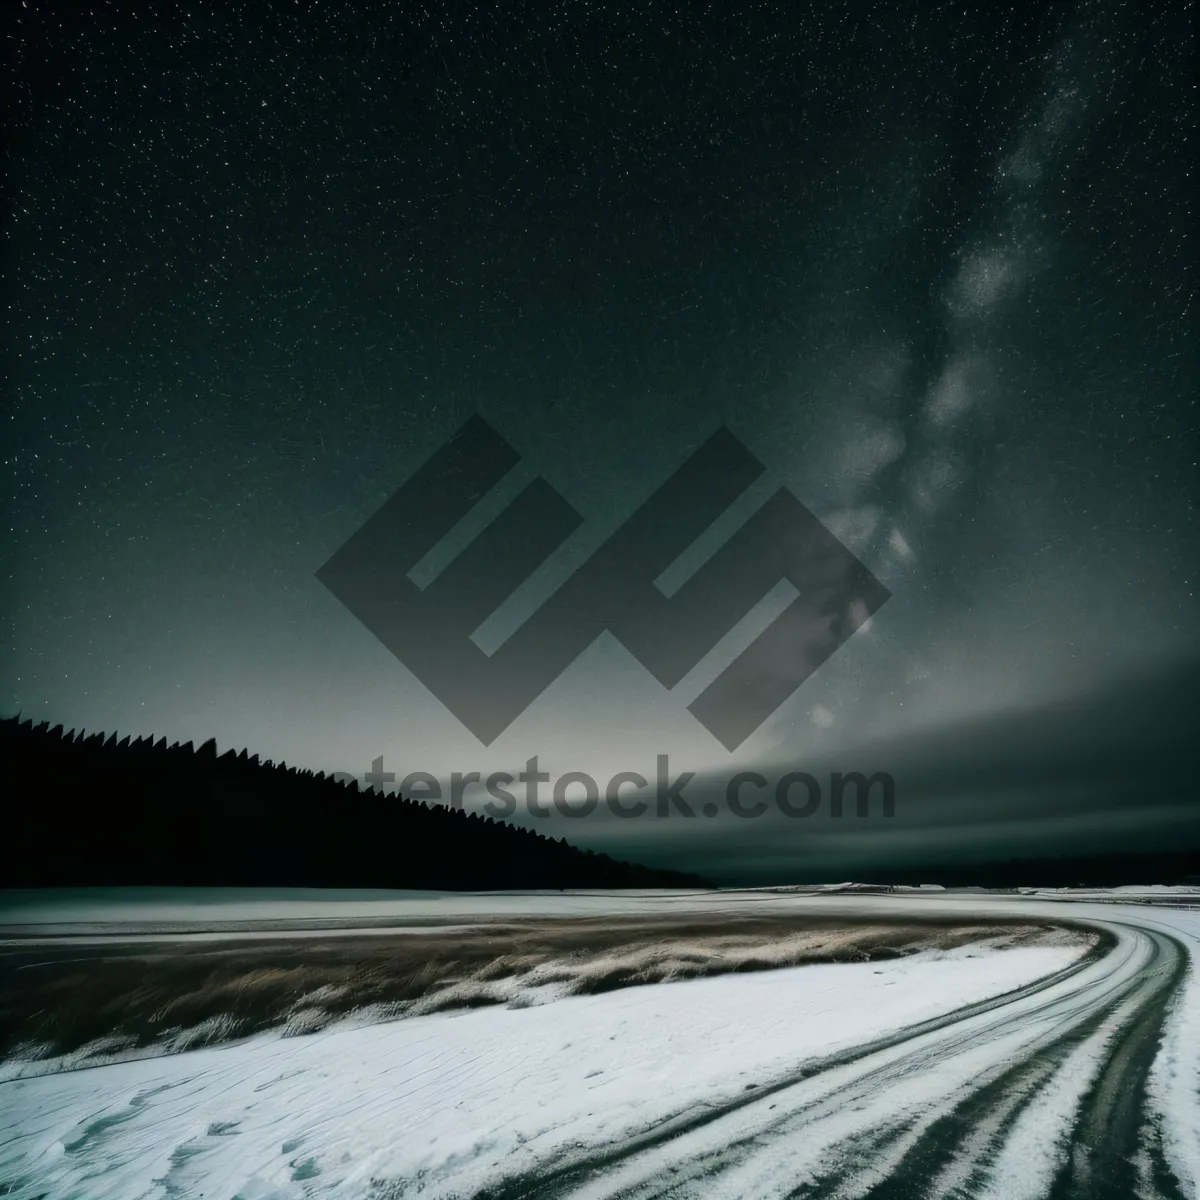 Picture of Majestic Night Sky Over Snowy Mountain Highway